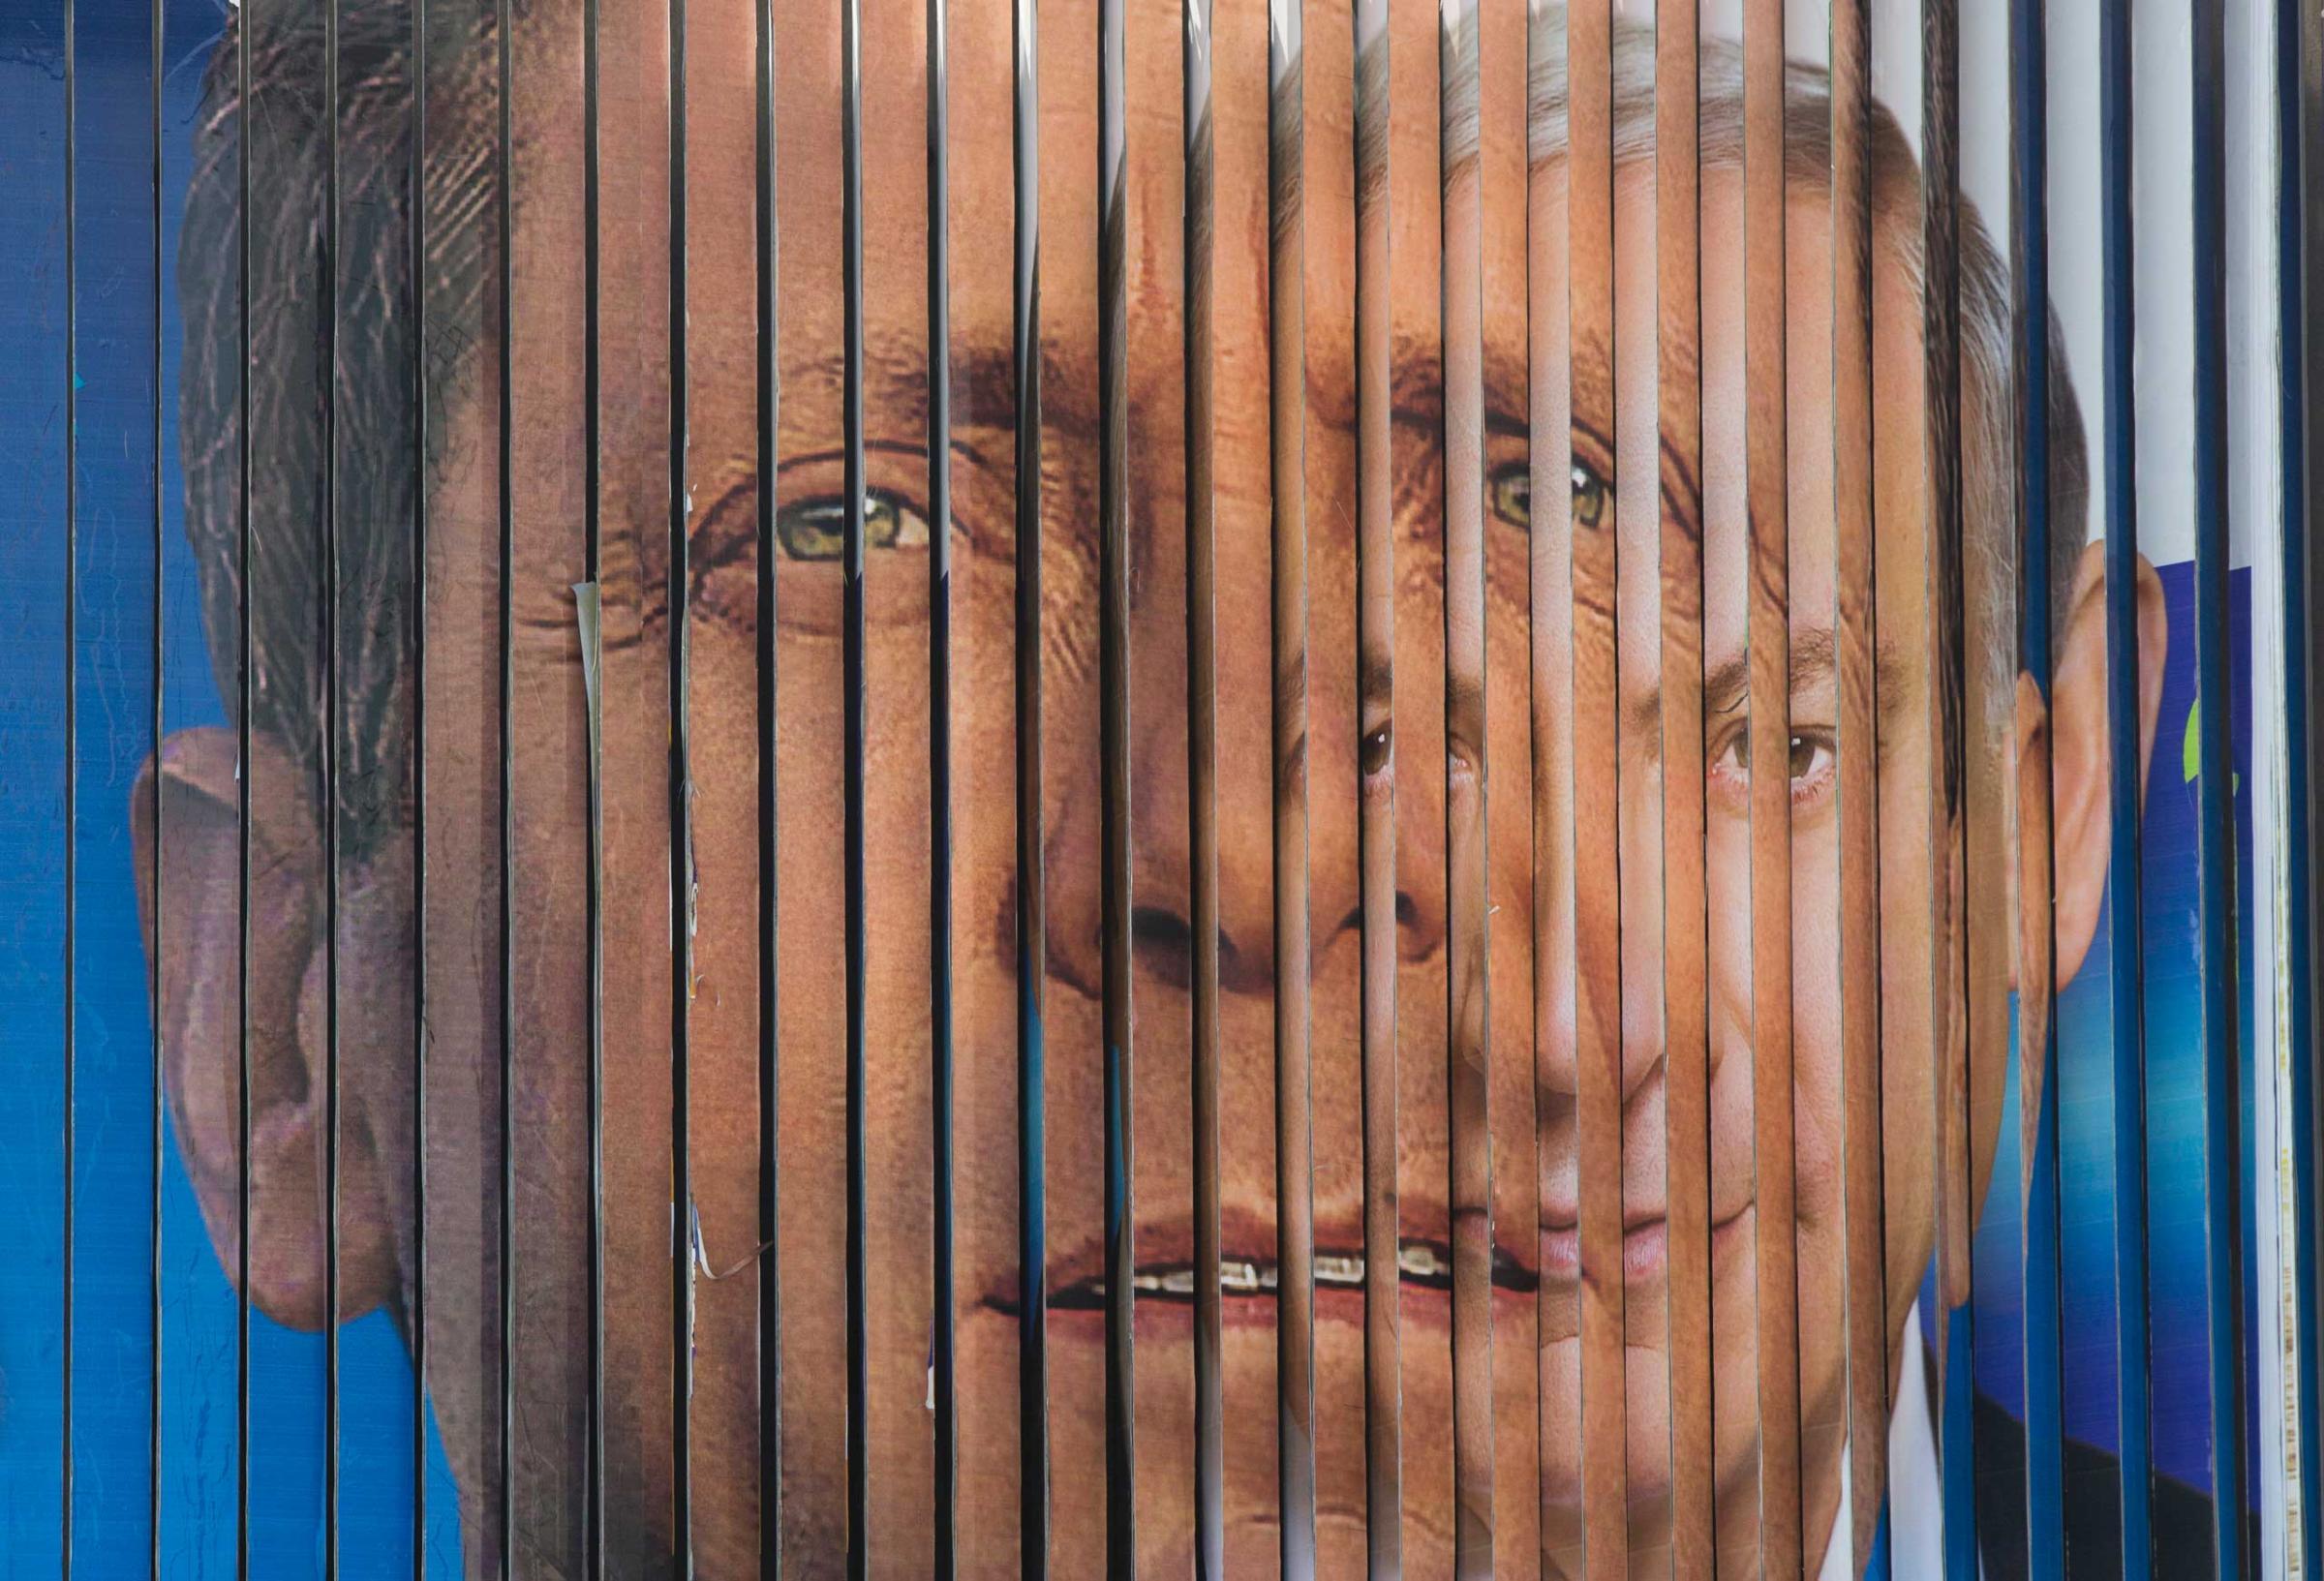 An election campaign billboard shifts between images of Israel's Labor Party leader Isaac Herzog, left, and Likud Party leader and Israel's Prime Minister Benjamin Netanyahu in Tel Aviv, March 15, 2015.